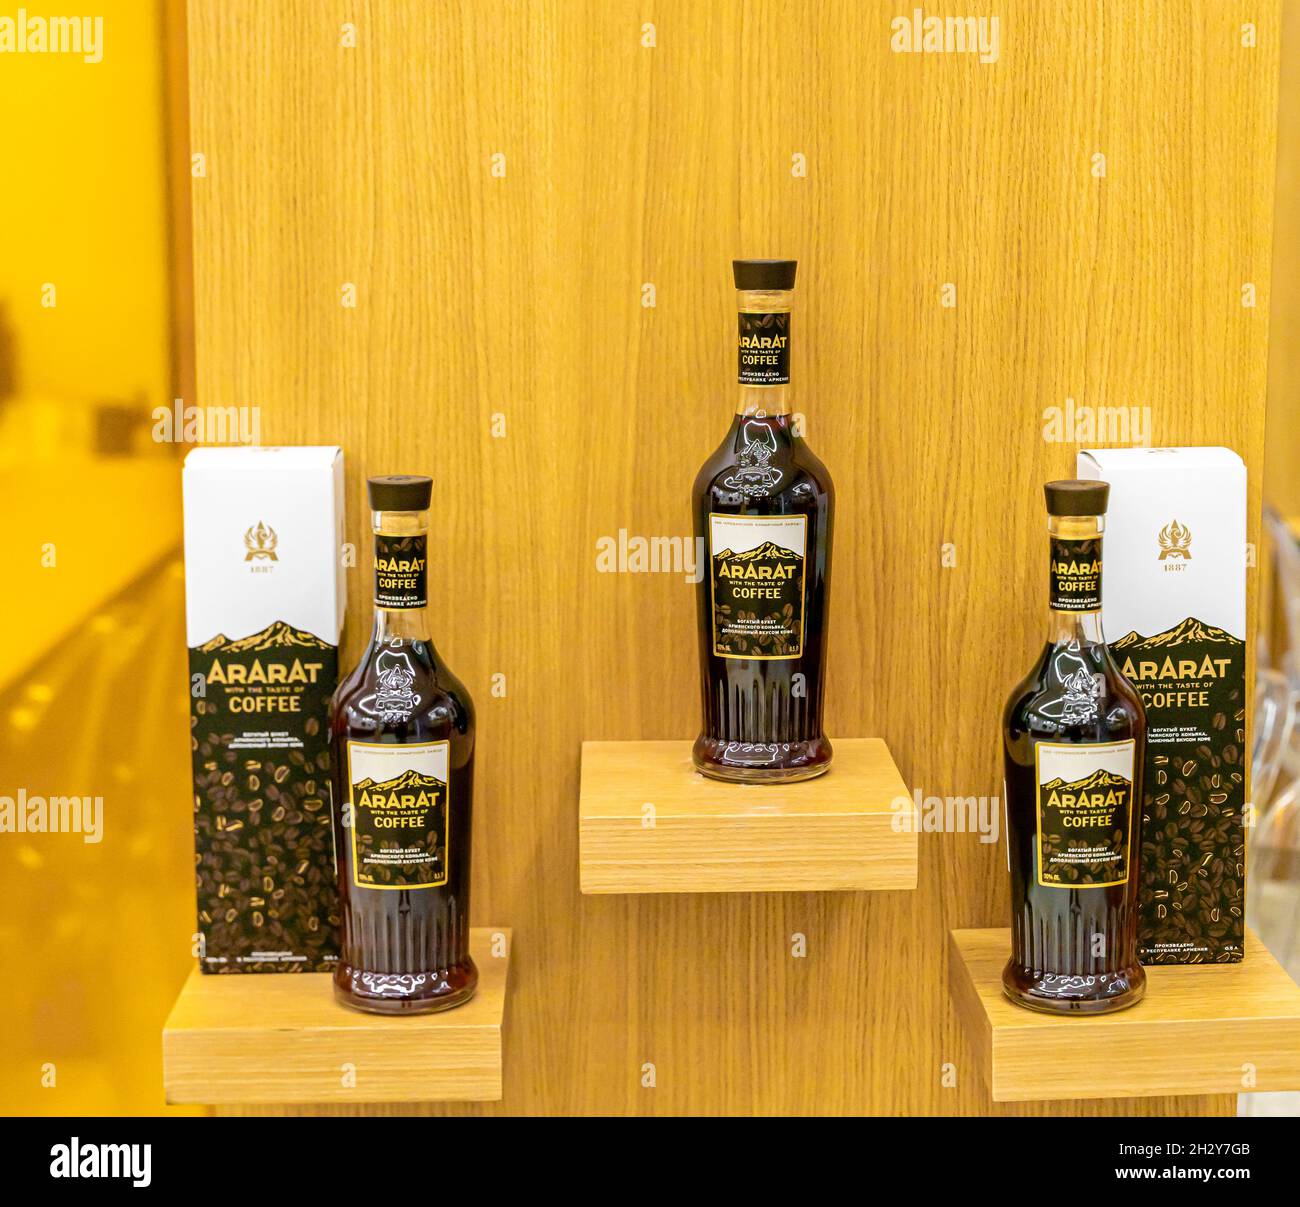 Ararat coffee brandy bottles display in Armenia pavillion in VDNKH, Moscow, Russia. Cognac-style premium brandy that has been produced since 1887. Stock Photo